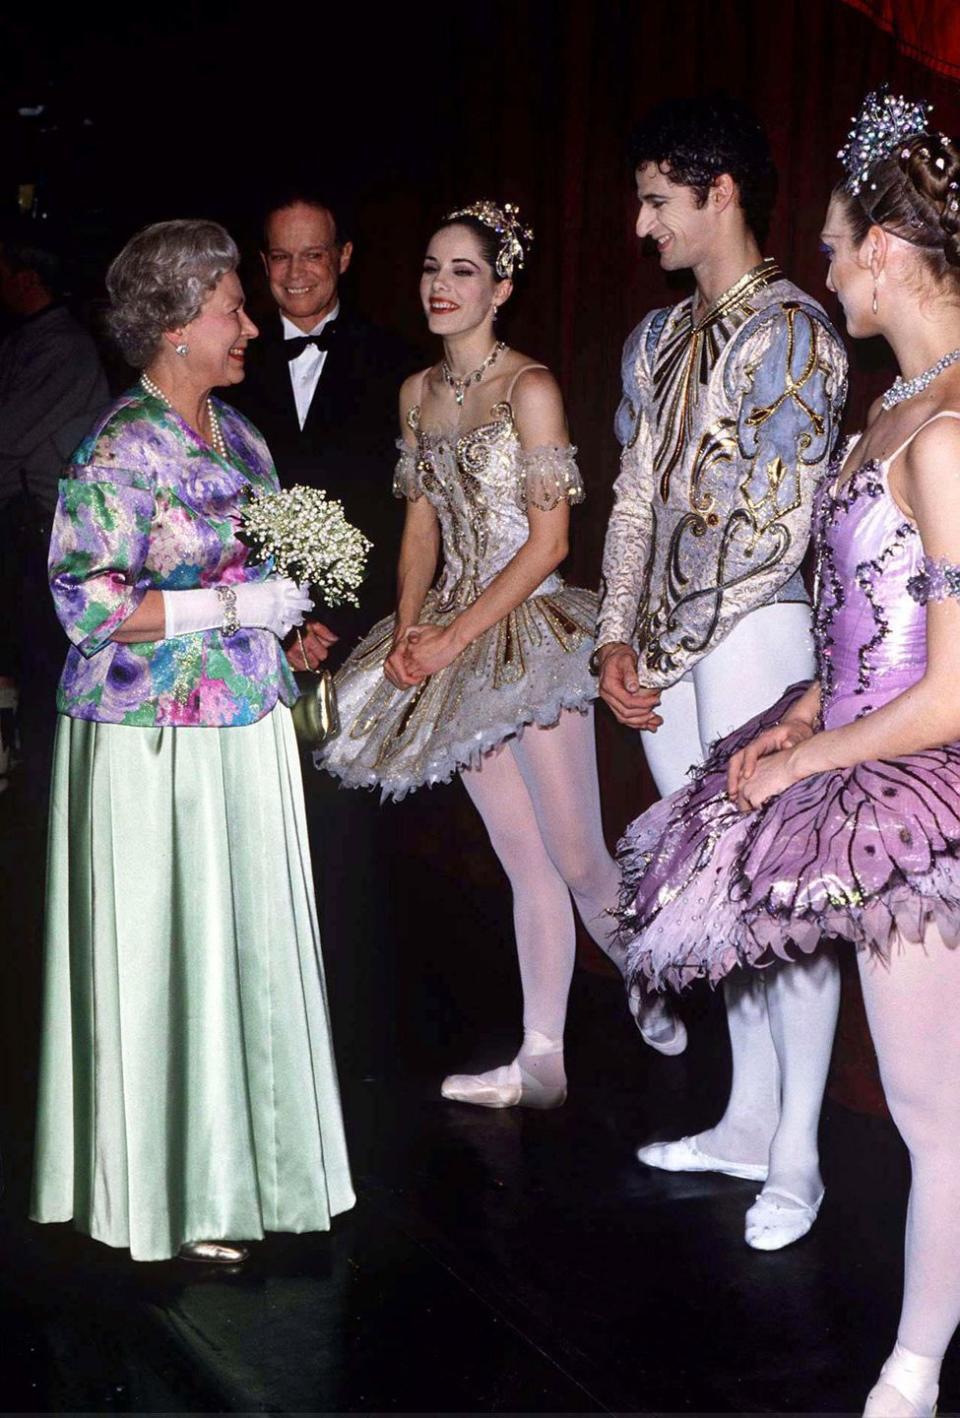 <p>The Queen visits with dancers from "Sleeping Beauty" at the Royal Opera House in 1996.</p>